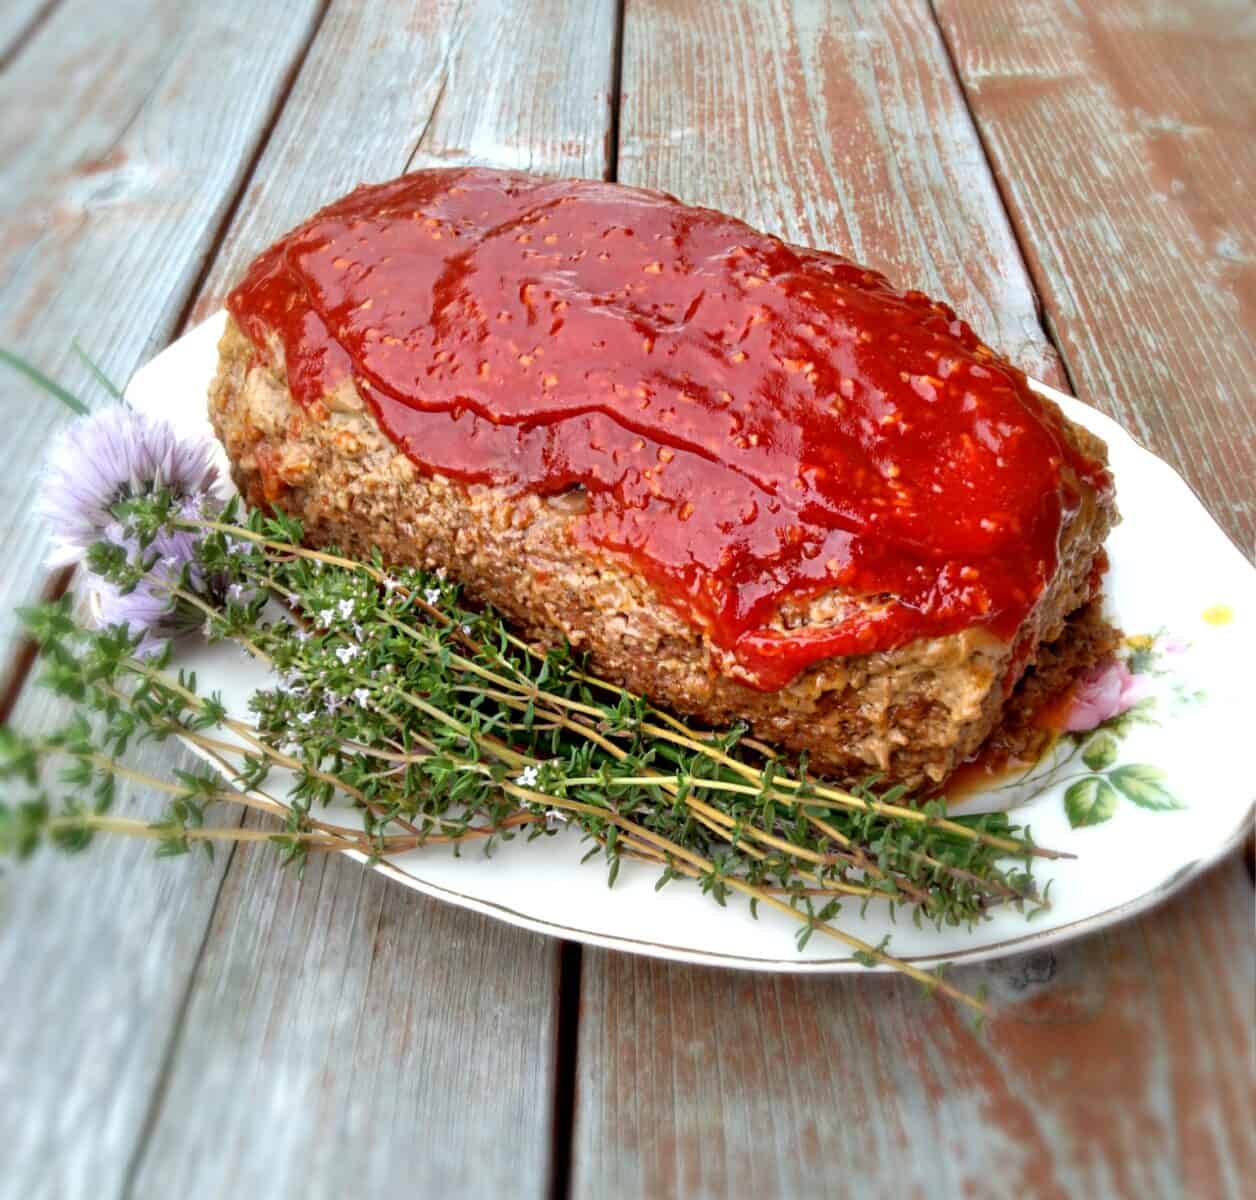 Amish meatloaf with oats